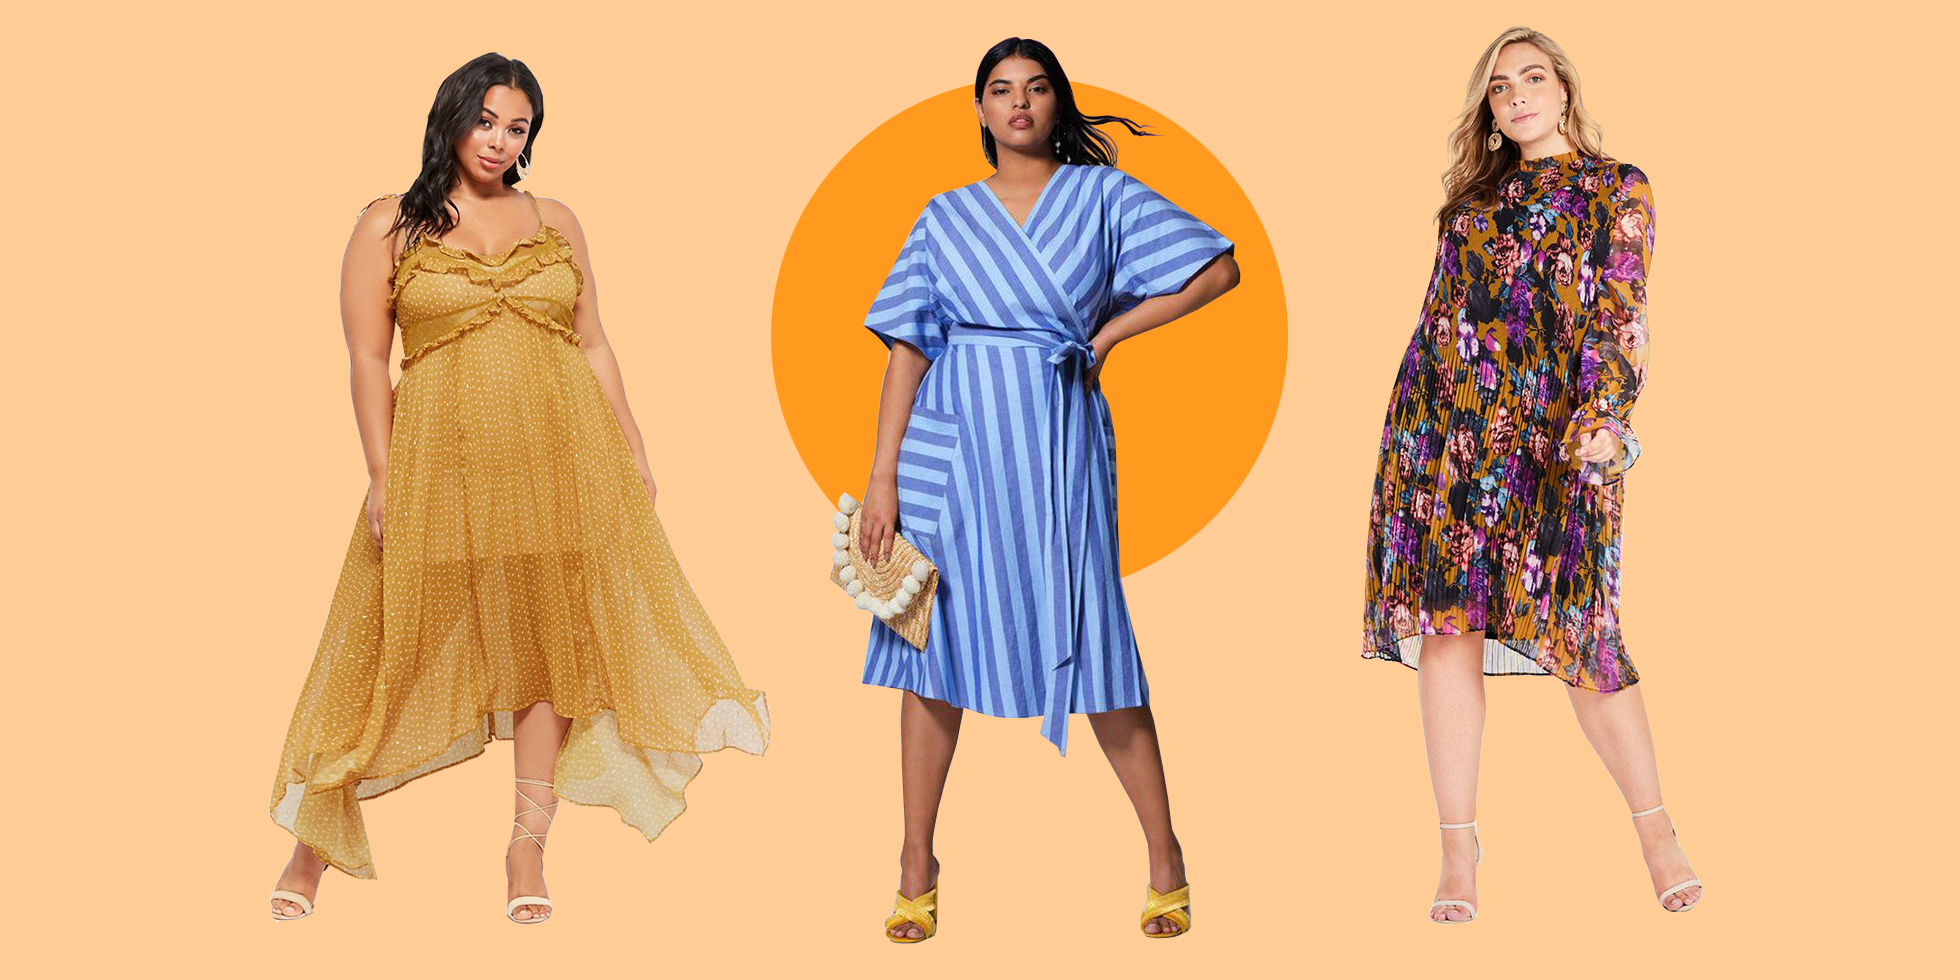 16 Cute Spring Wedding Guest Dresses What To Wear To Spring 2019